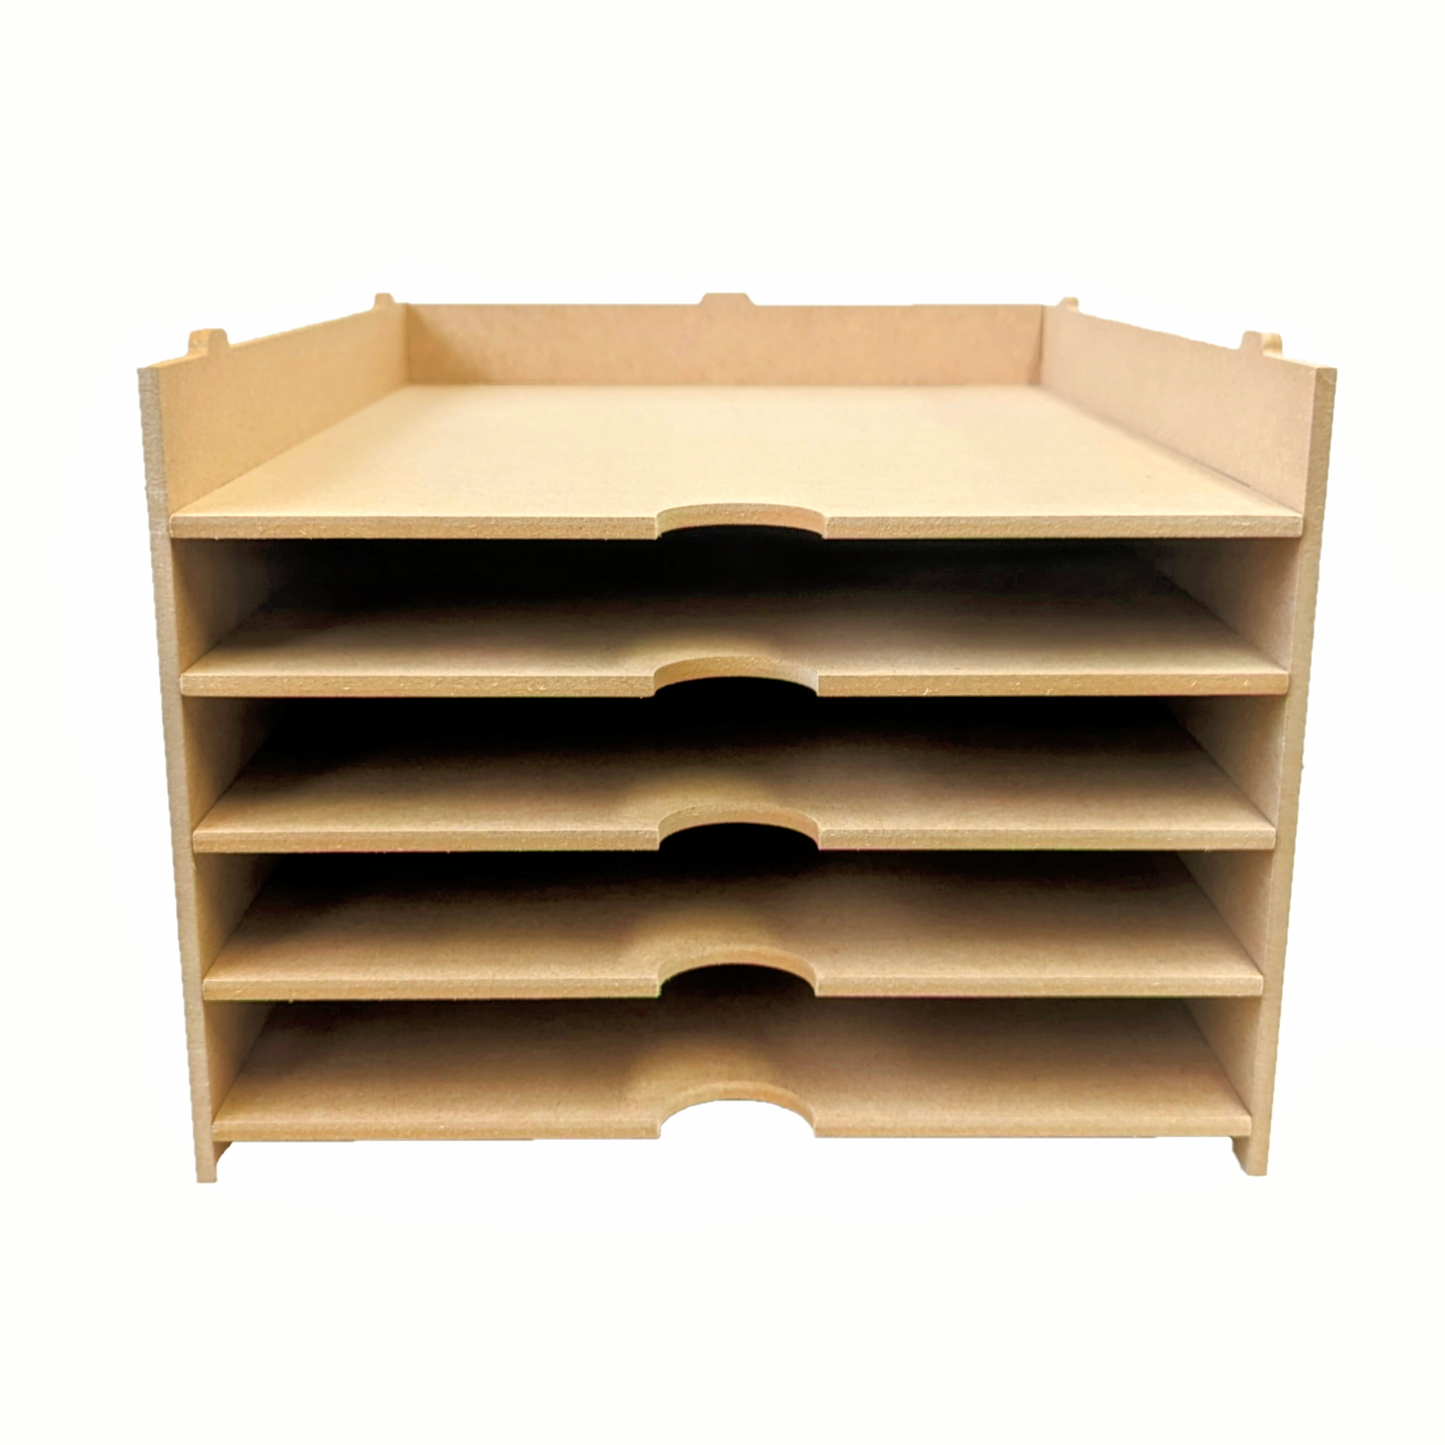 A3 Paper storage shelf, 5 shelves with stackable design - SECONDS